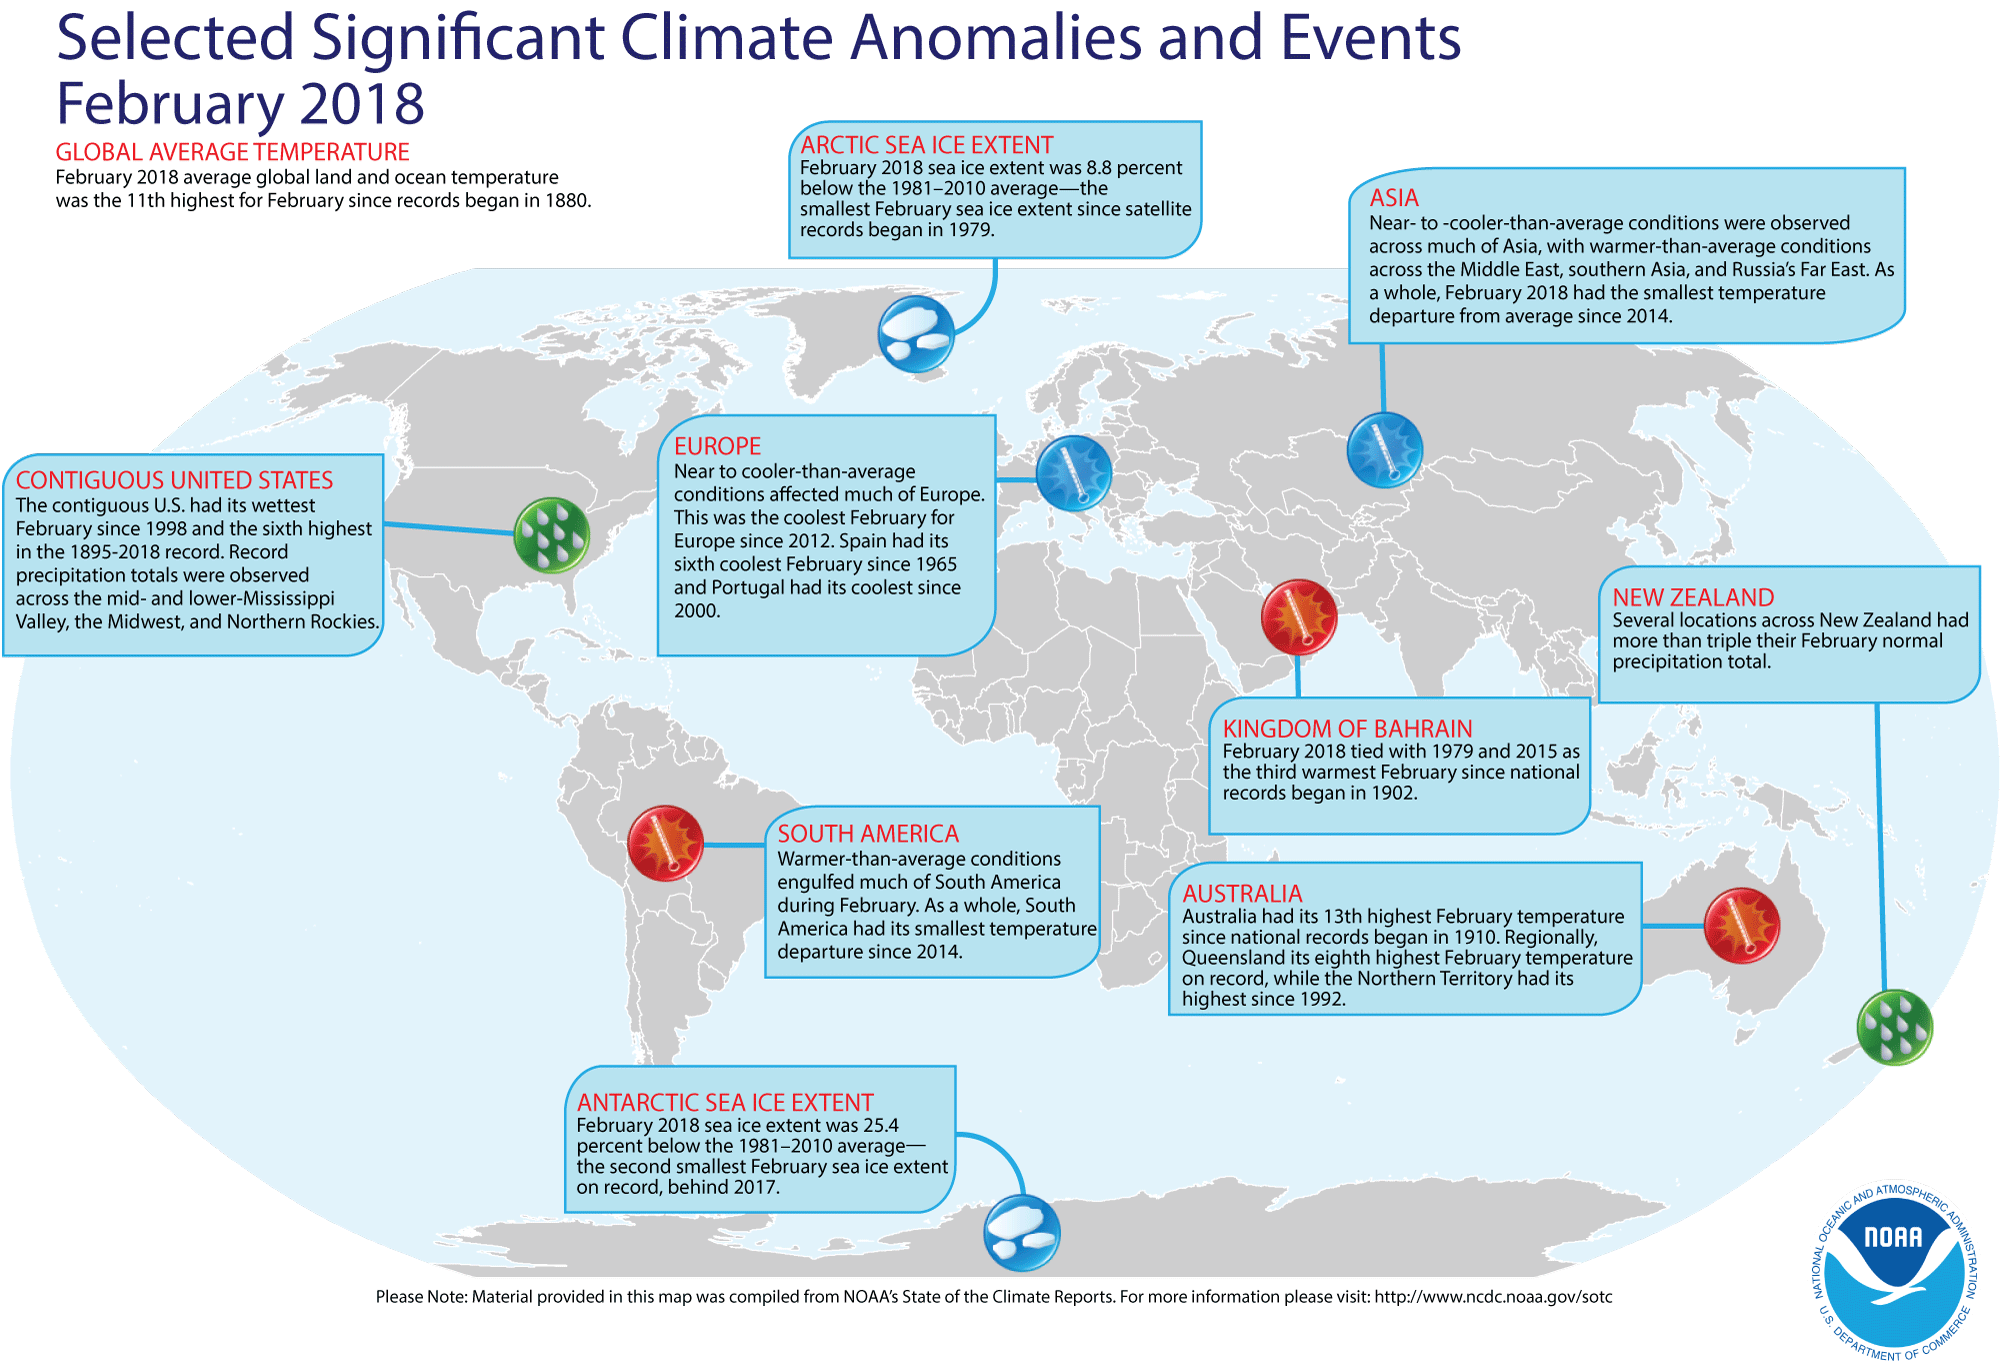 An annotated map of the globe showing other notable climate events that occurred during February and Winter 2018. For details, see bulleted list below in our story and also visit https://www.ncei.noaa.gov/news/global-climate-201802.